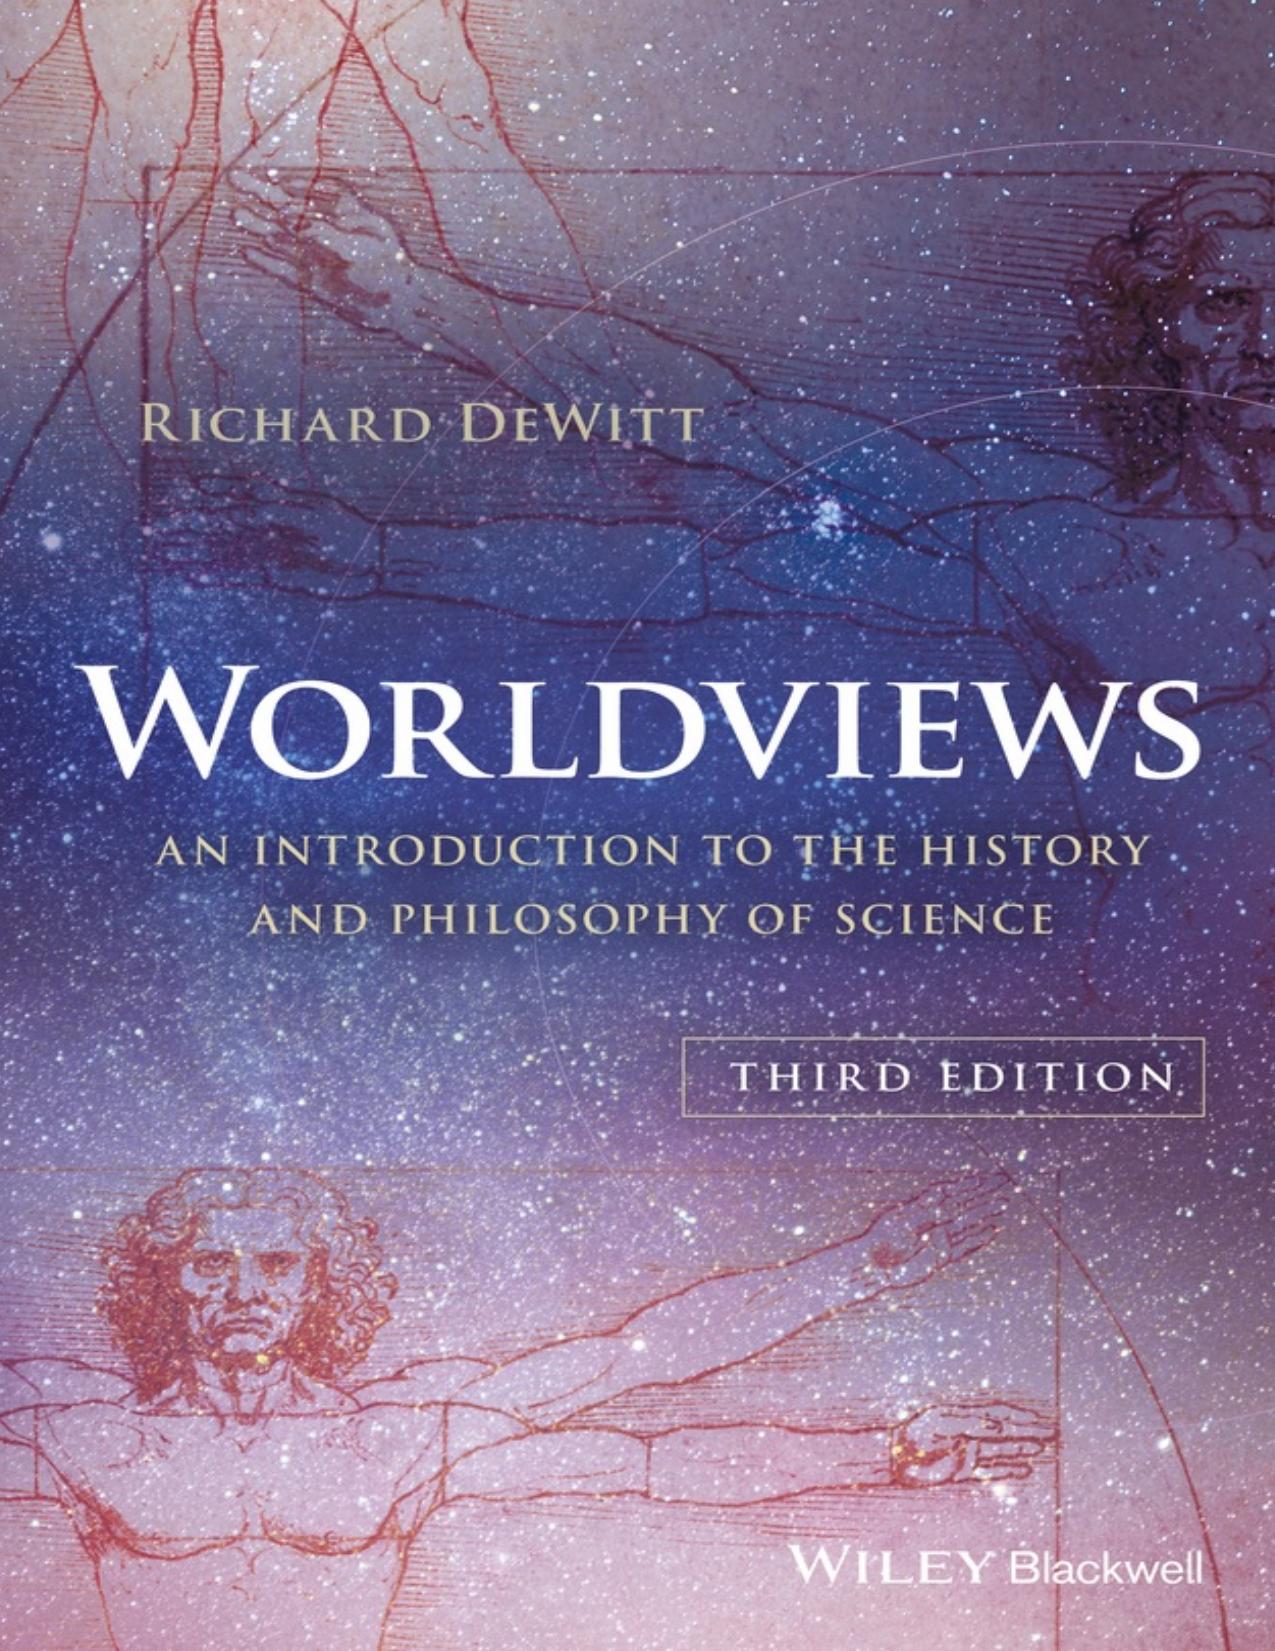 Worldviews: An Introduction to the History and Philosophy of Science - PDFDrive.com